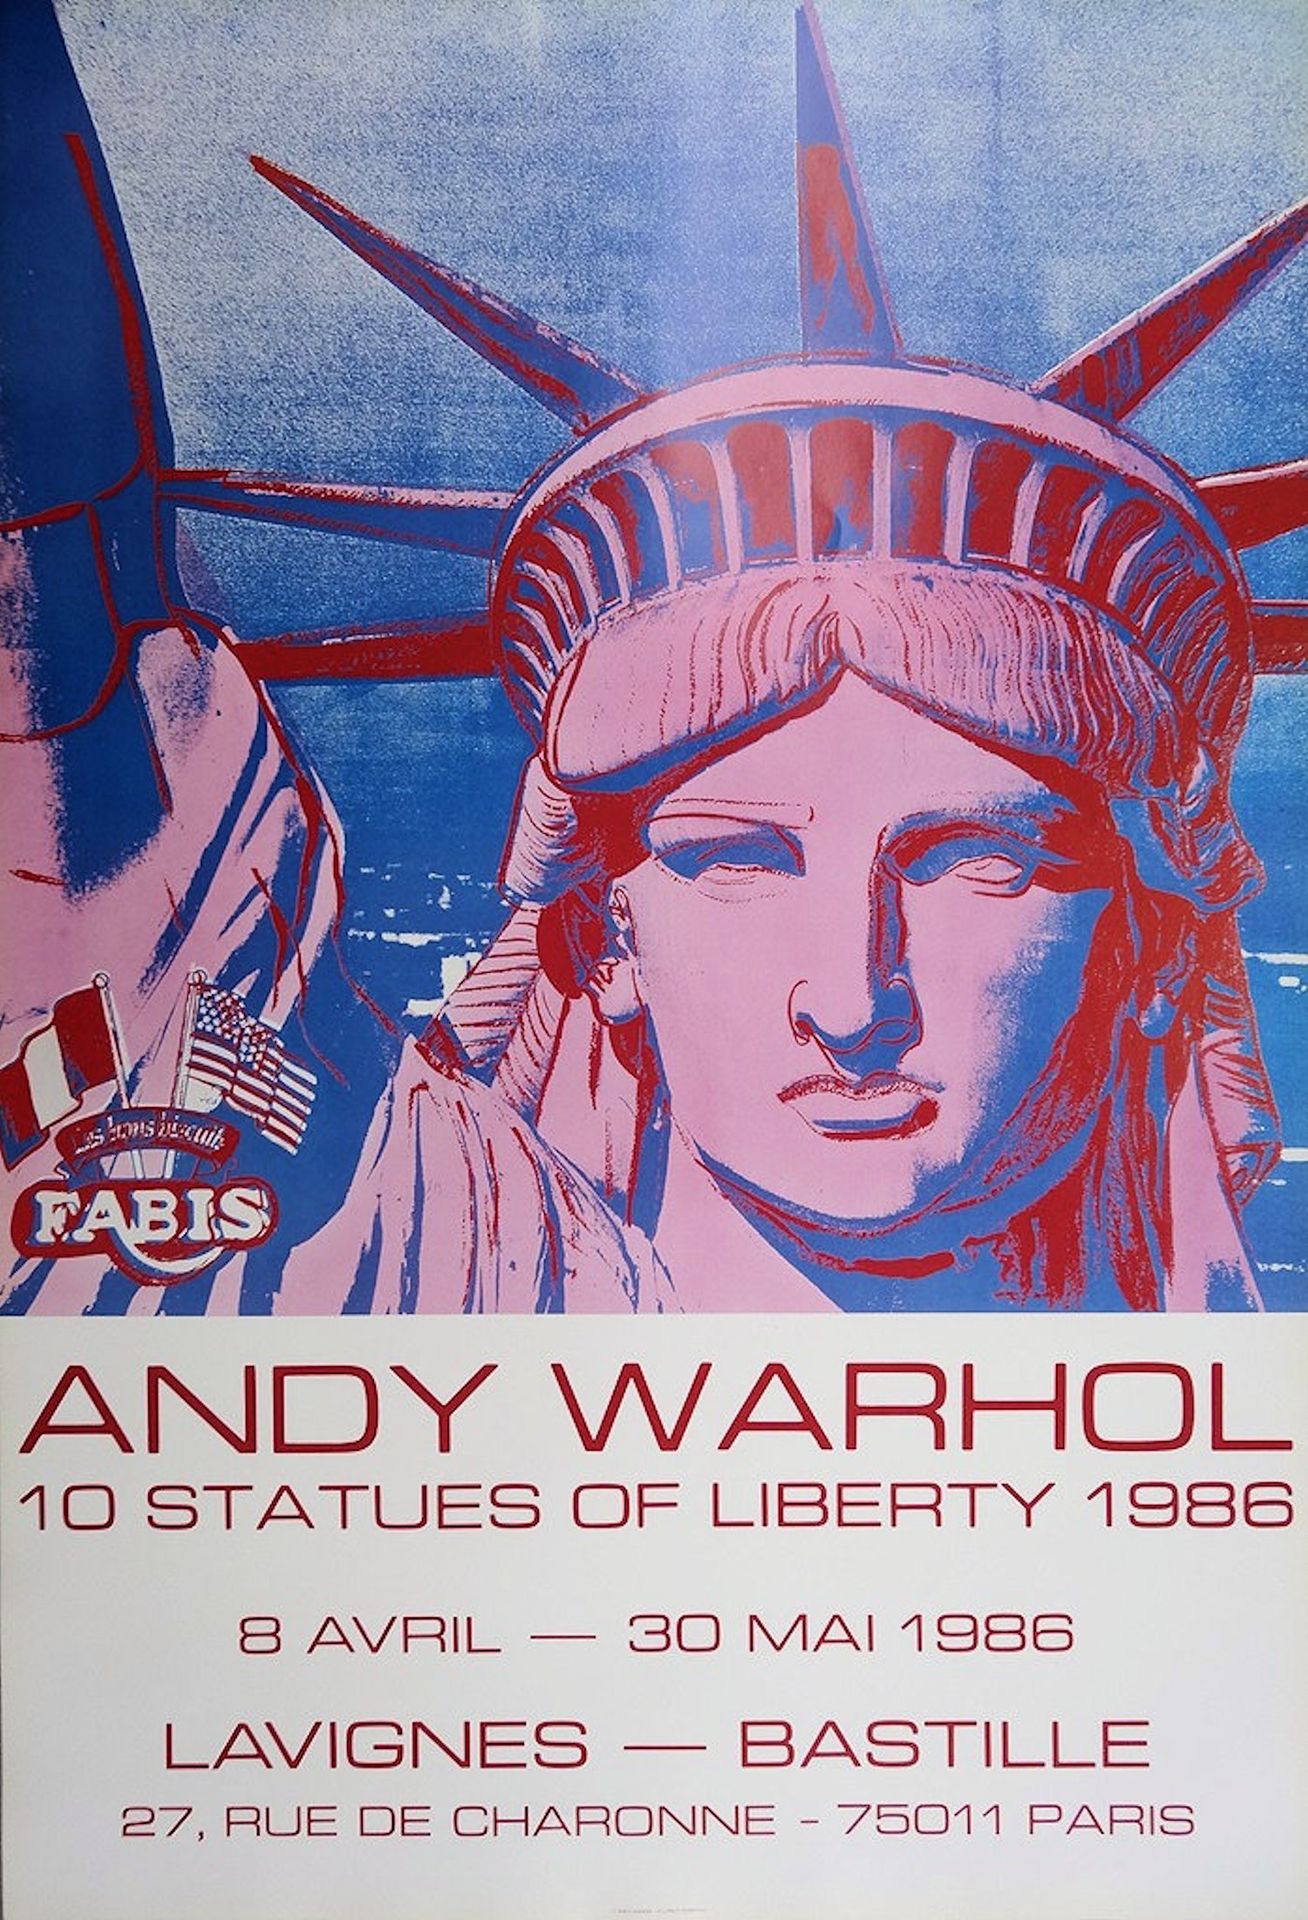 ANDY WARHOL WARHOL Andy (1928-1987) (d'après)

10 Statues of Liberty

Affiche or&hellip;